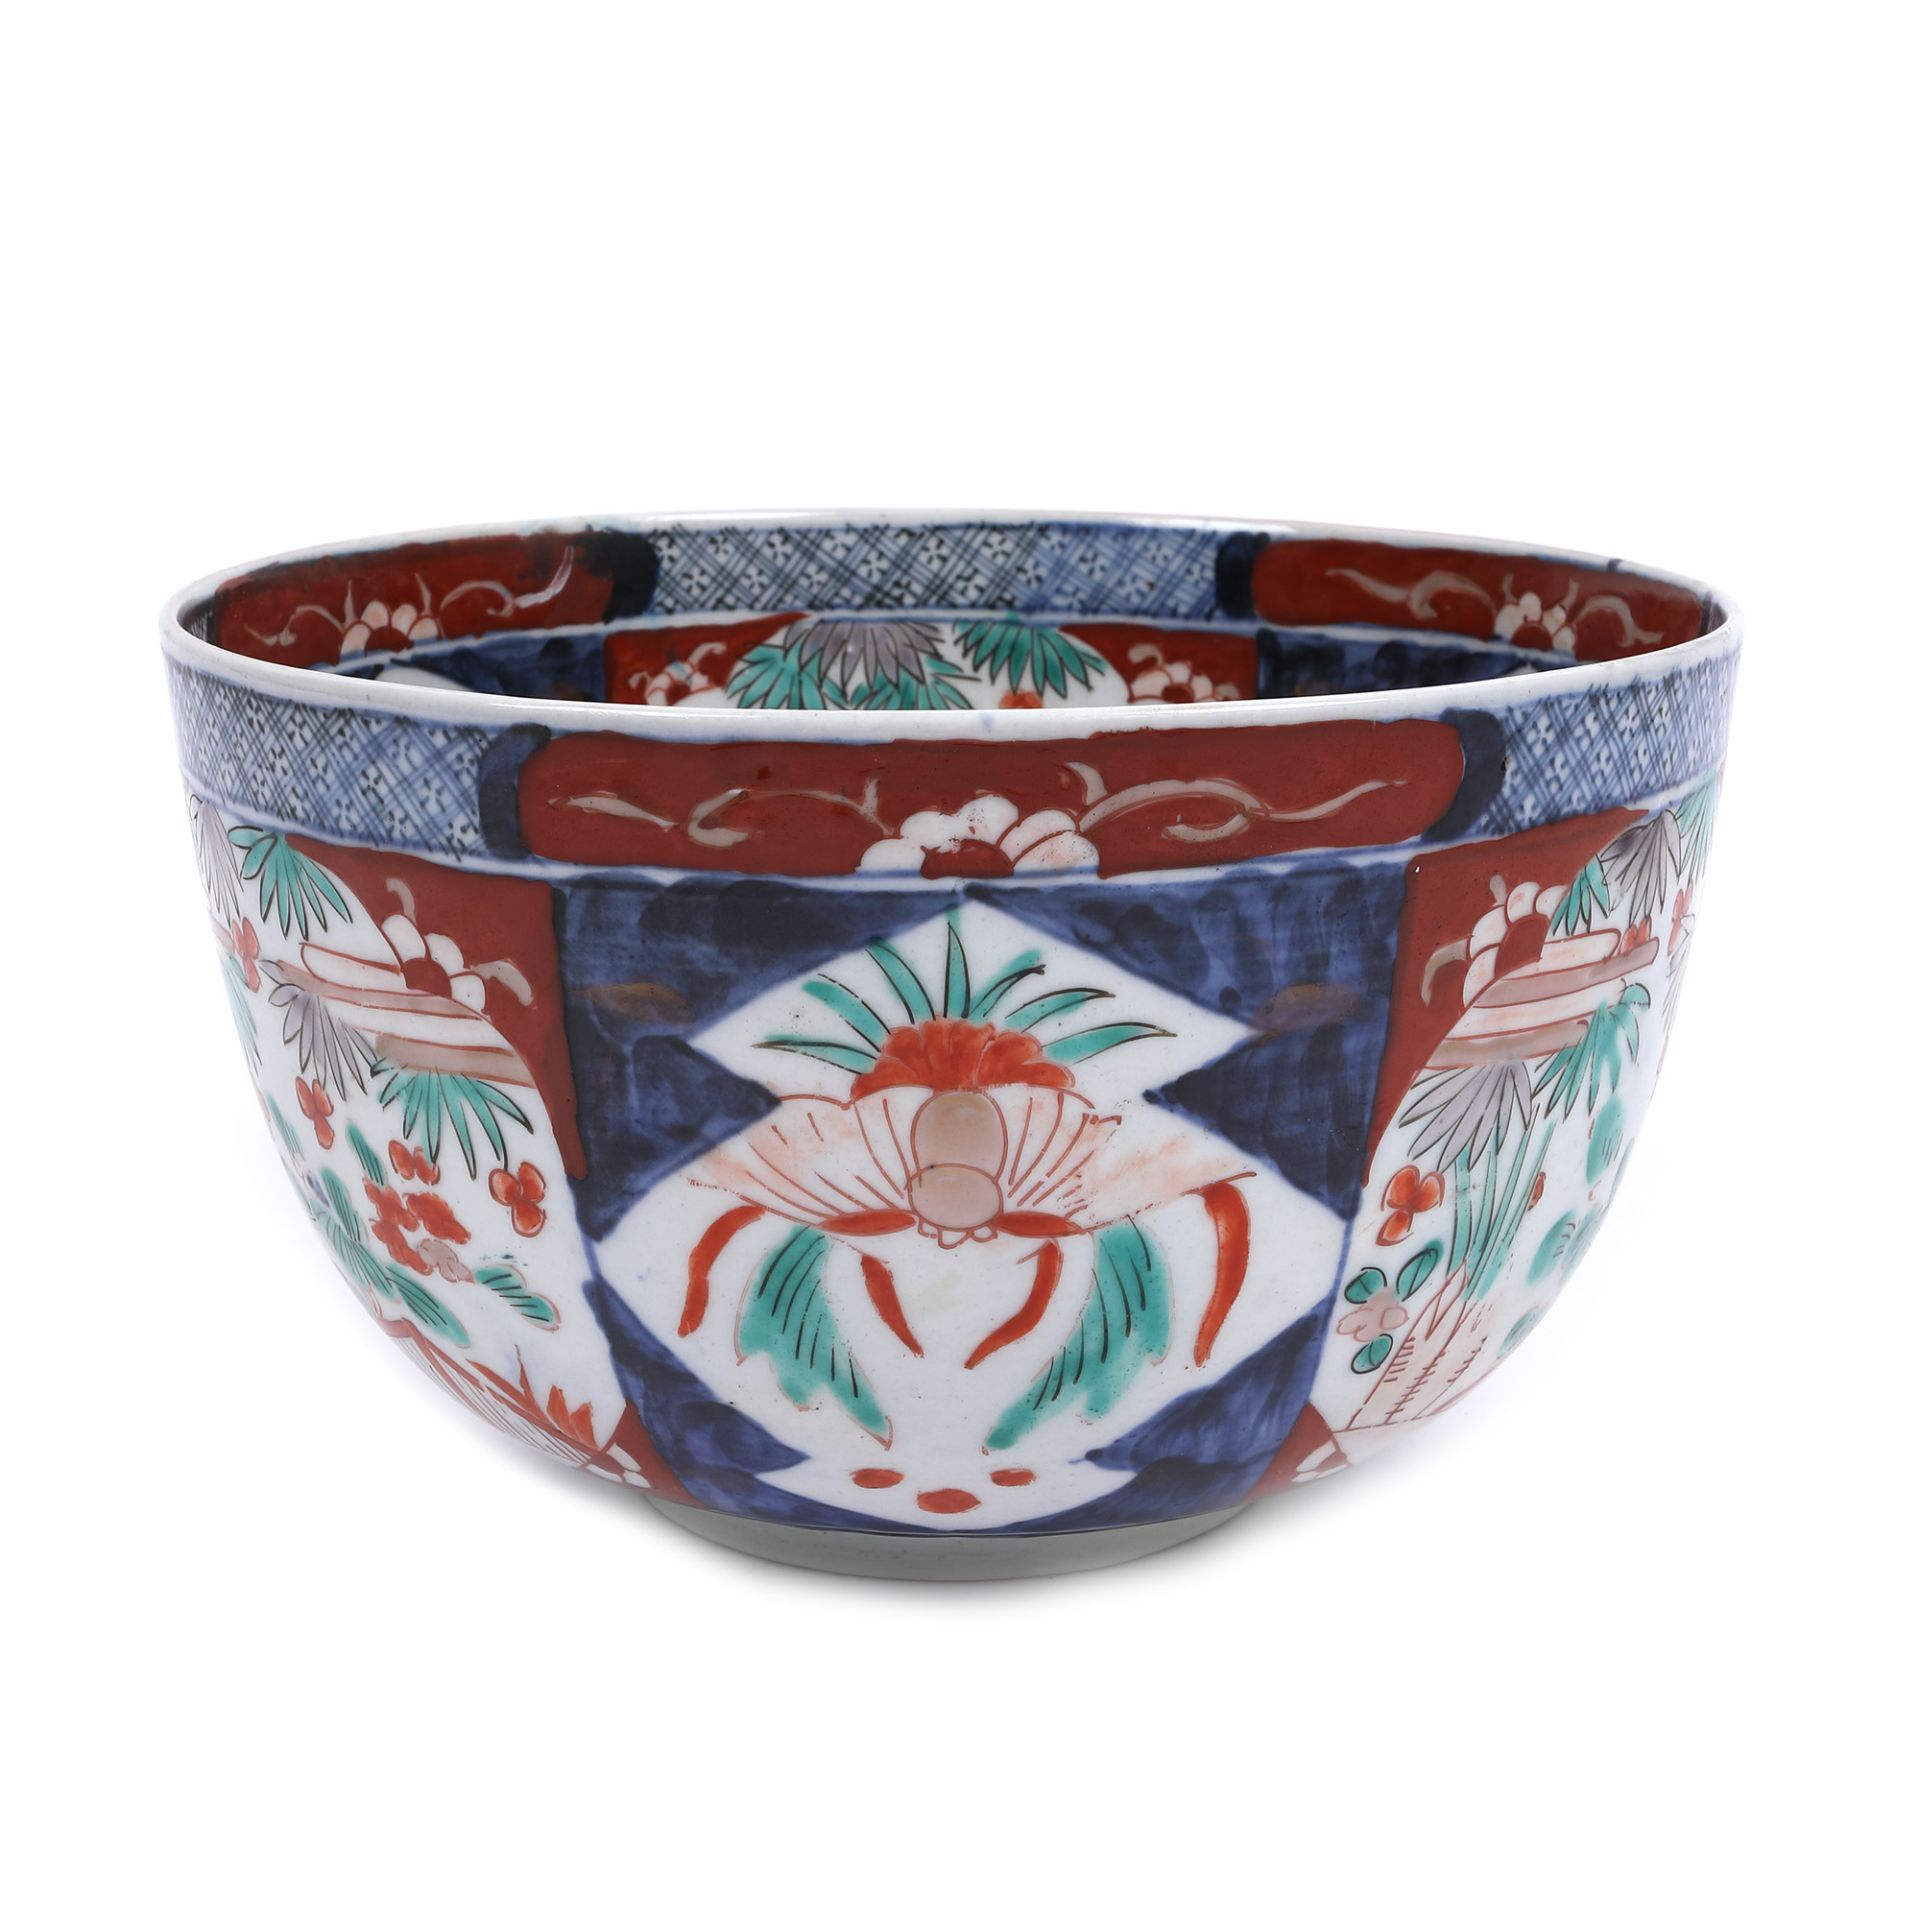 Imari vessel made of porcelain, decorated with lacustrine landscapes, the Meiji period, Japan, start